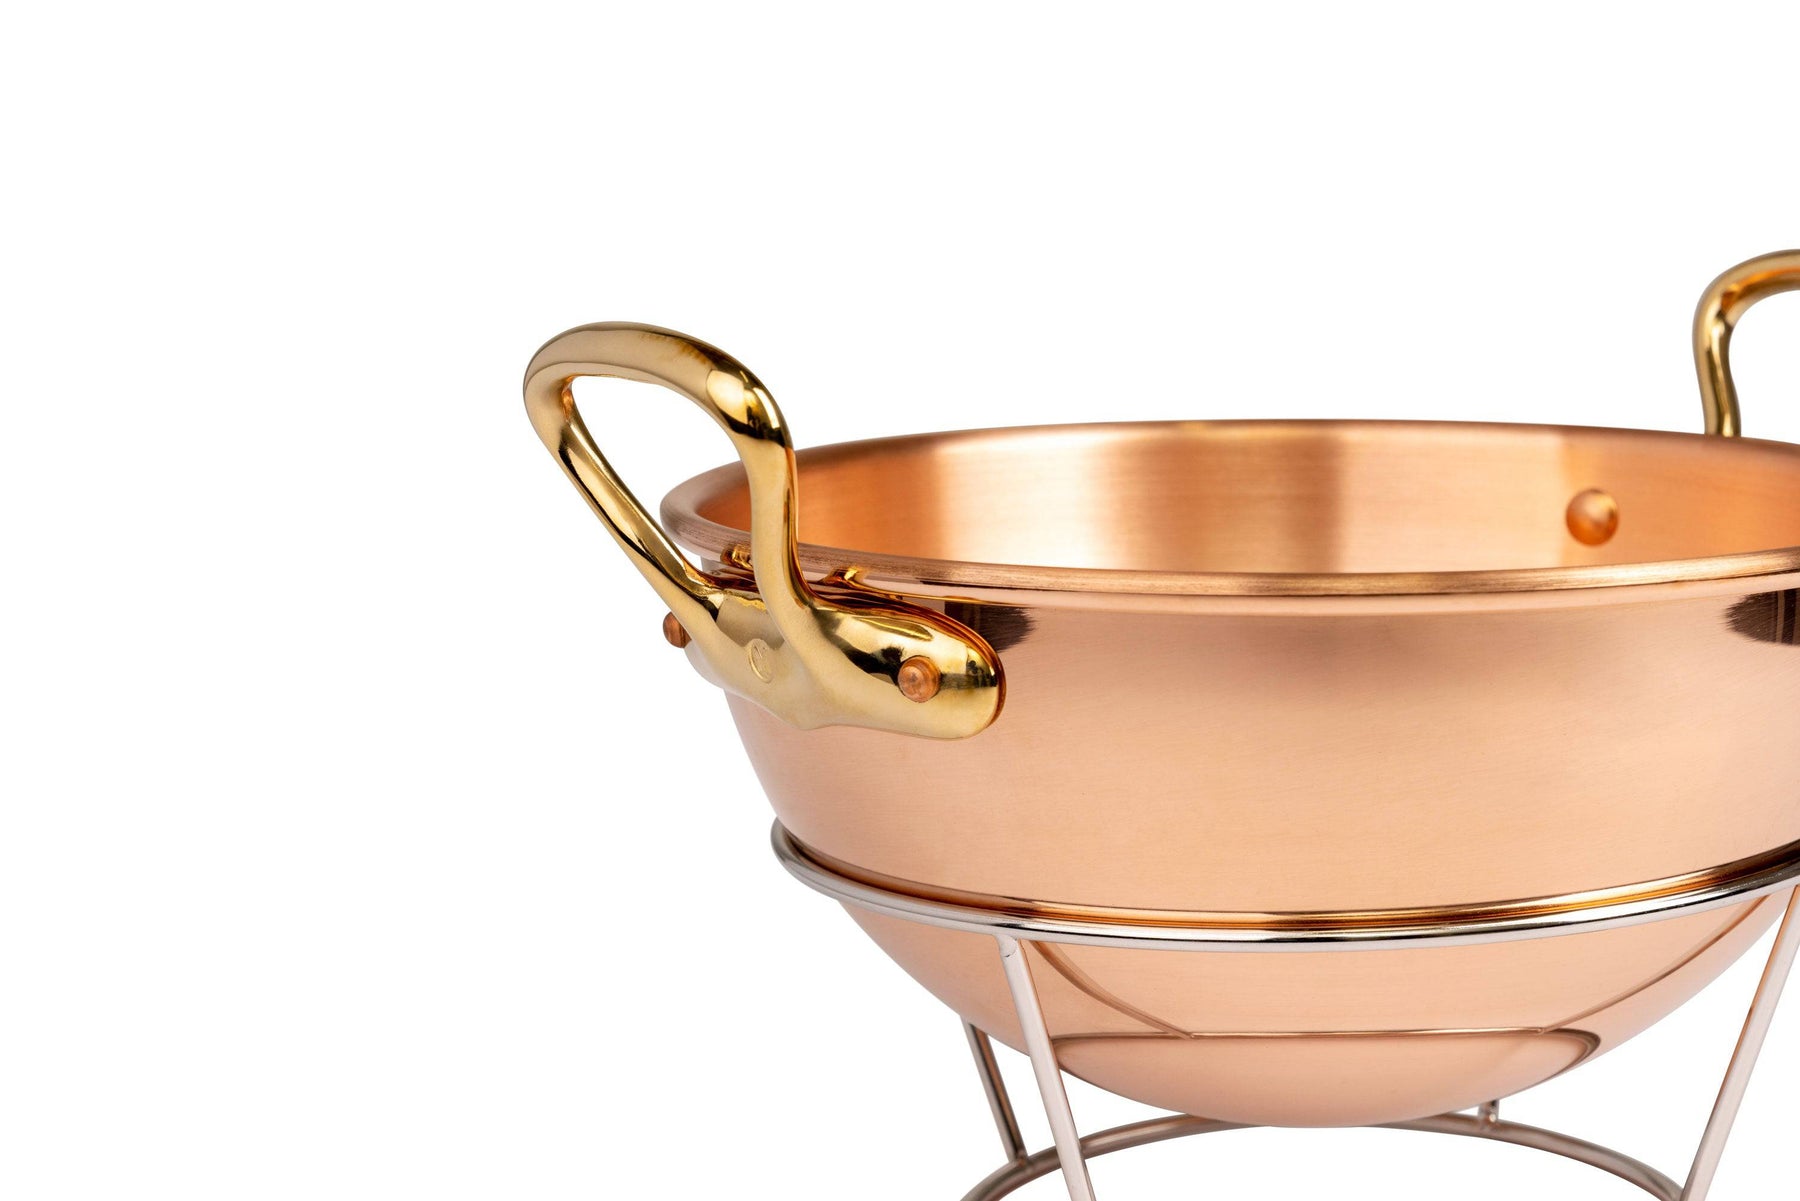 https://www.outletbakeware.com/wp-content/uploads/2023/03/Egg-Bowl-with-Brass-handles-Detail_1800x1800.jpg